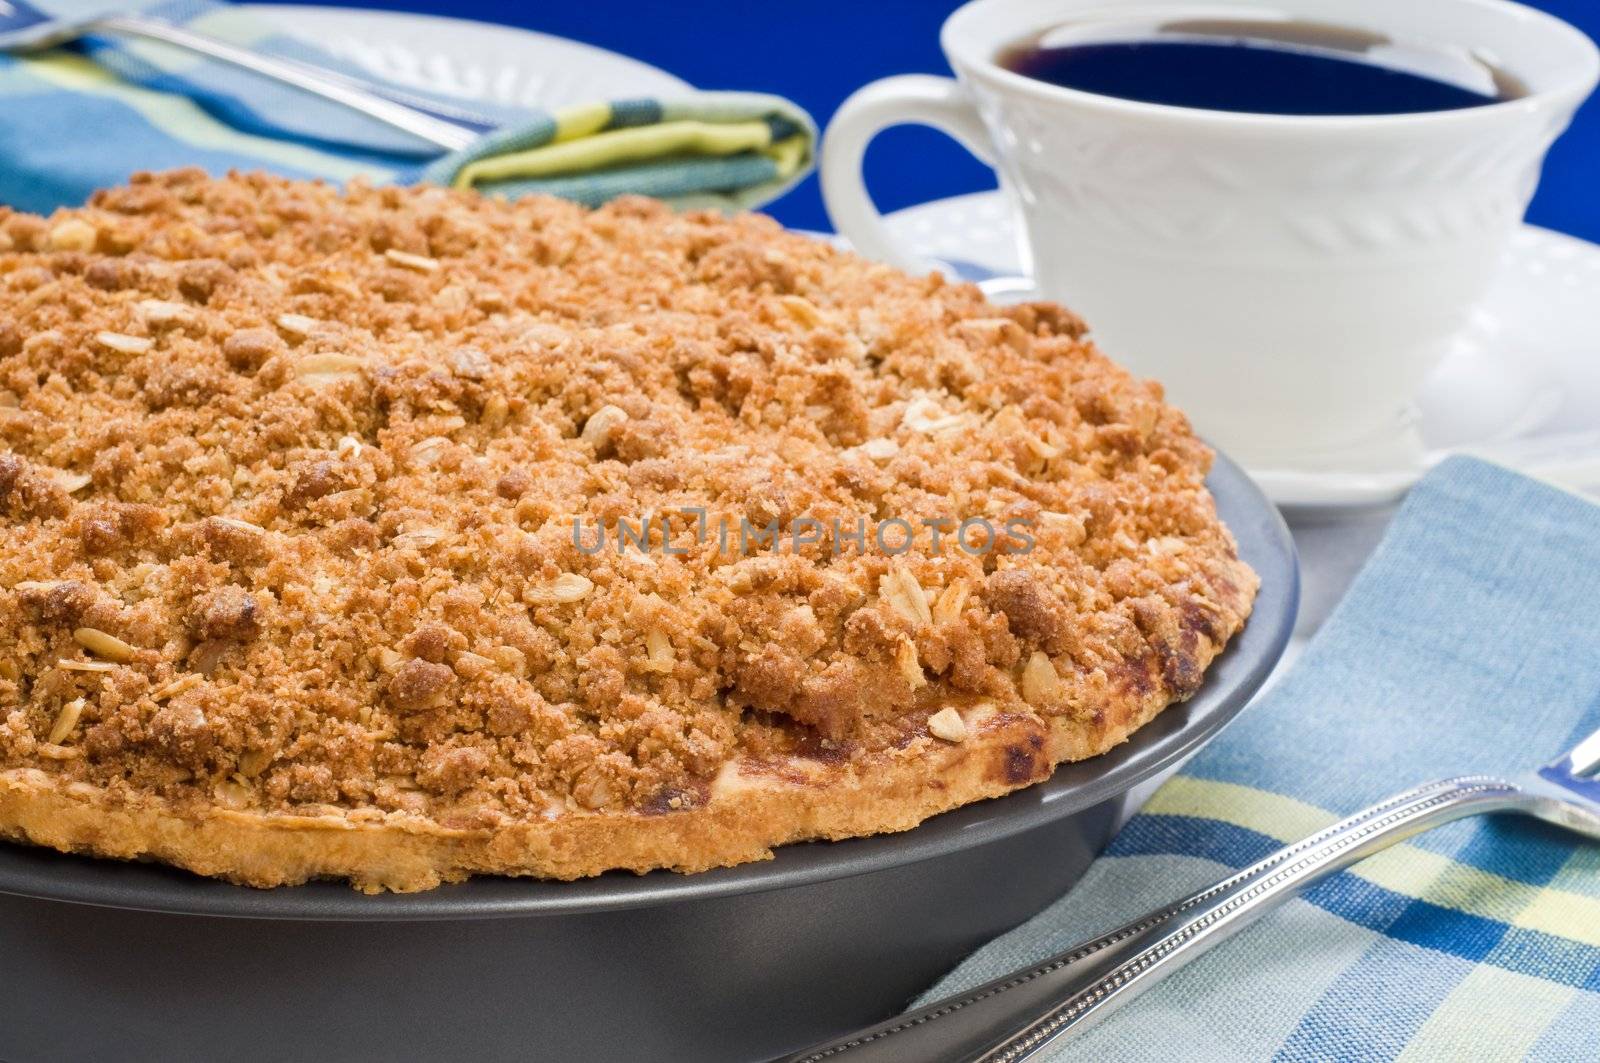 Delicious homemade apple pie served with coffee.